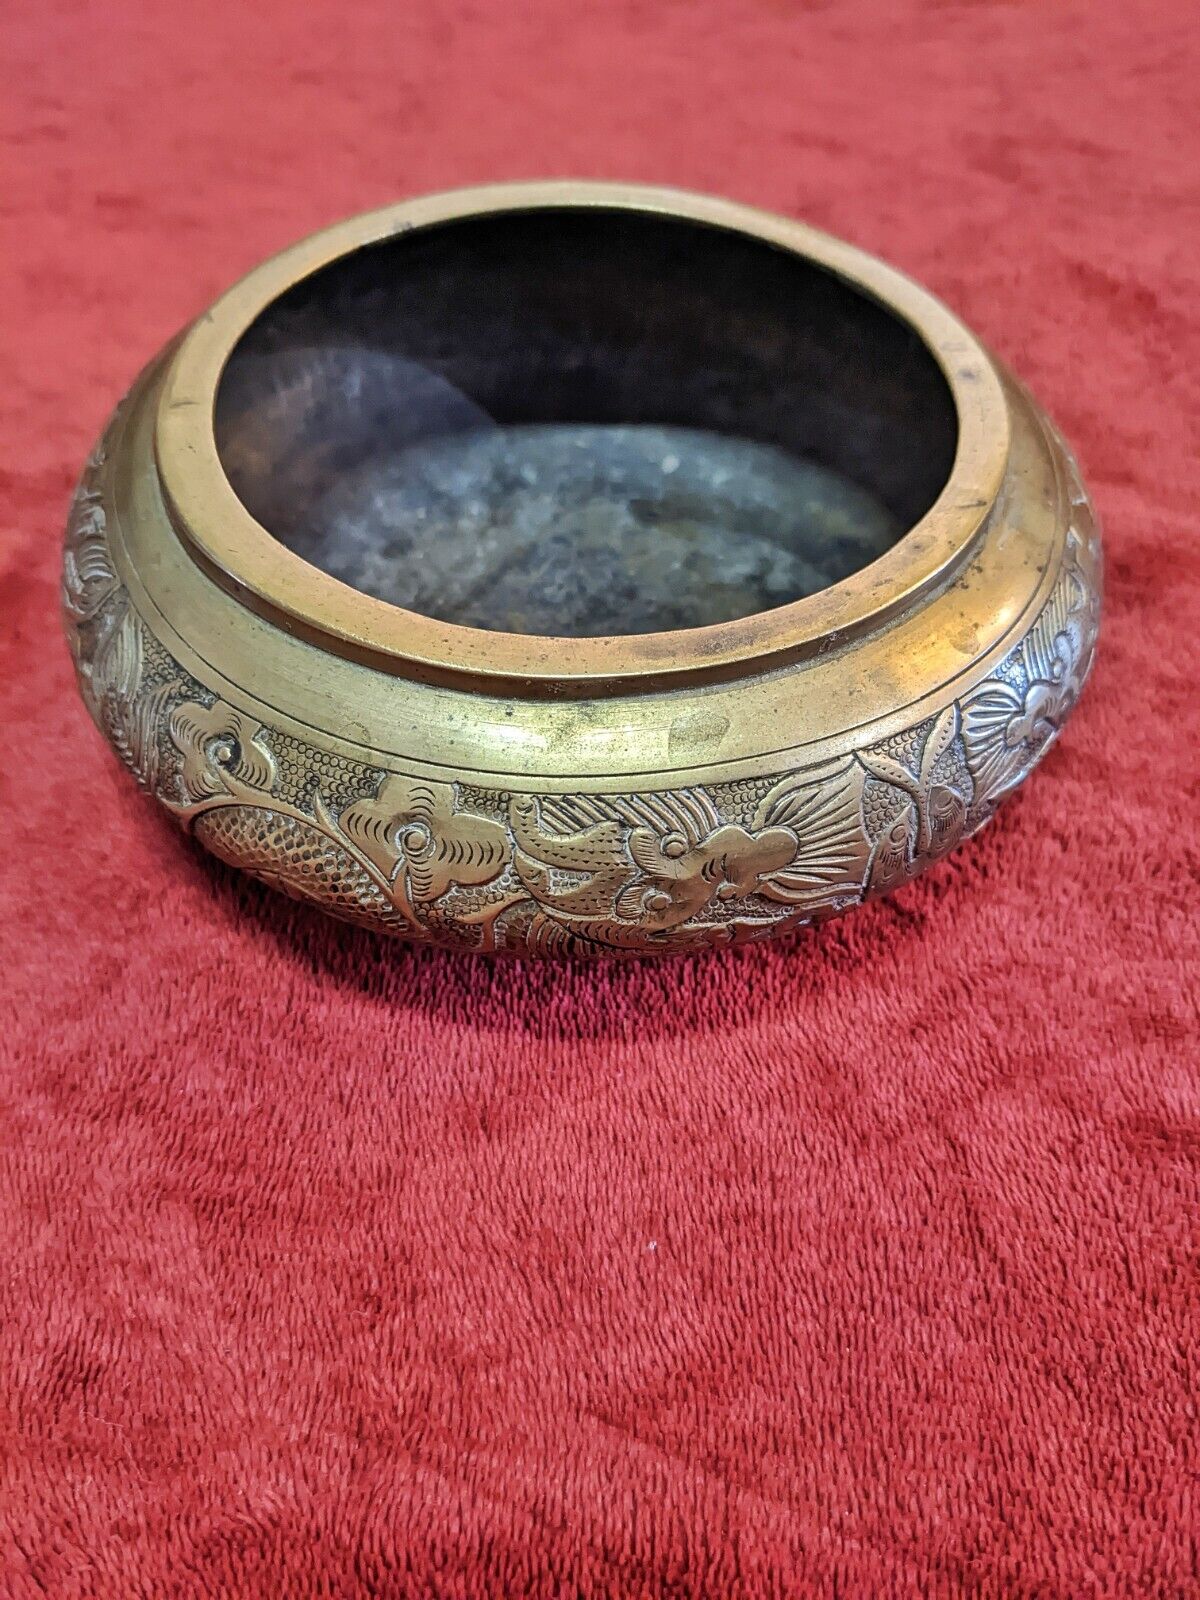 Antique Xuande Mark 18th/19th C. Chinese Brass Bowl, Dragon-design, Heavy